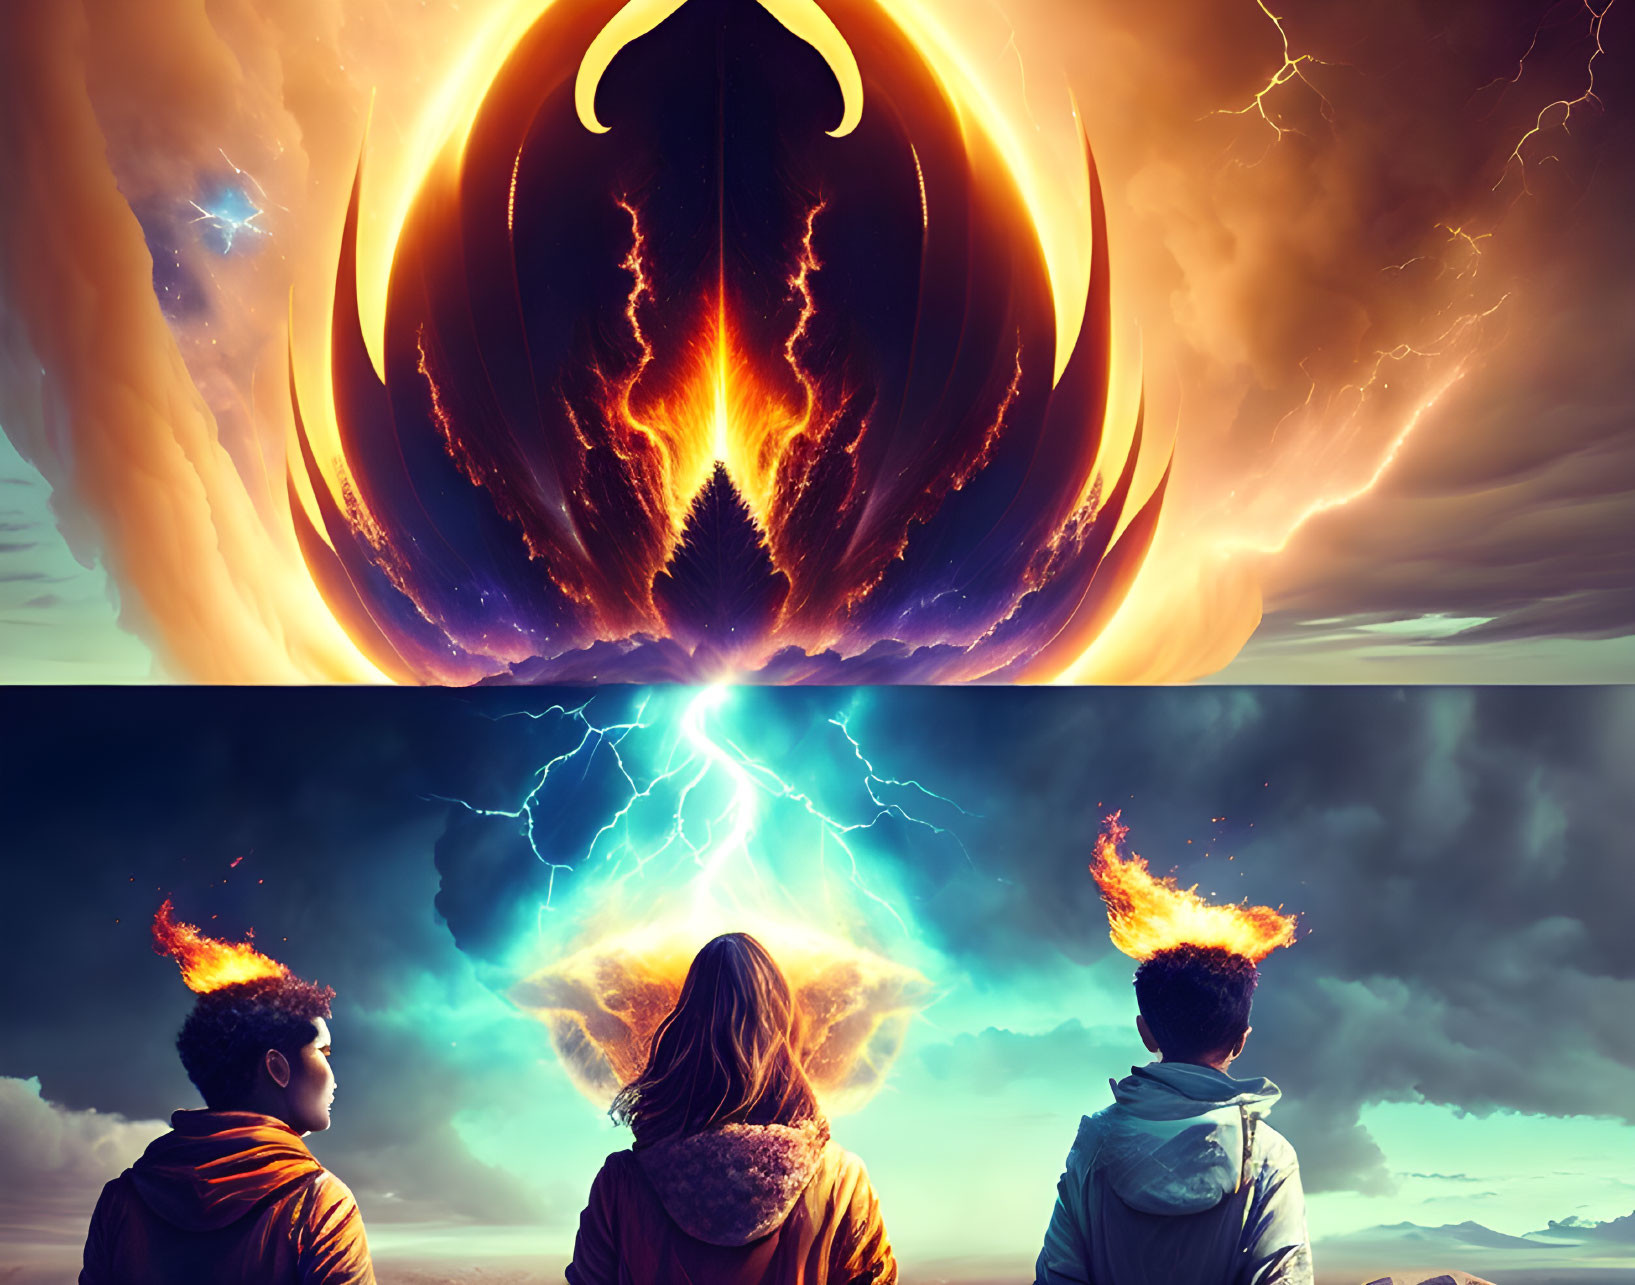 Three people observing surreal sky with fiery phoenix and lightning.